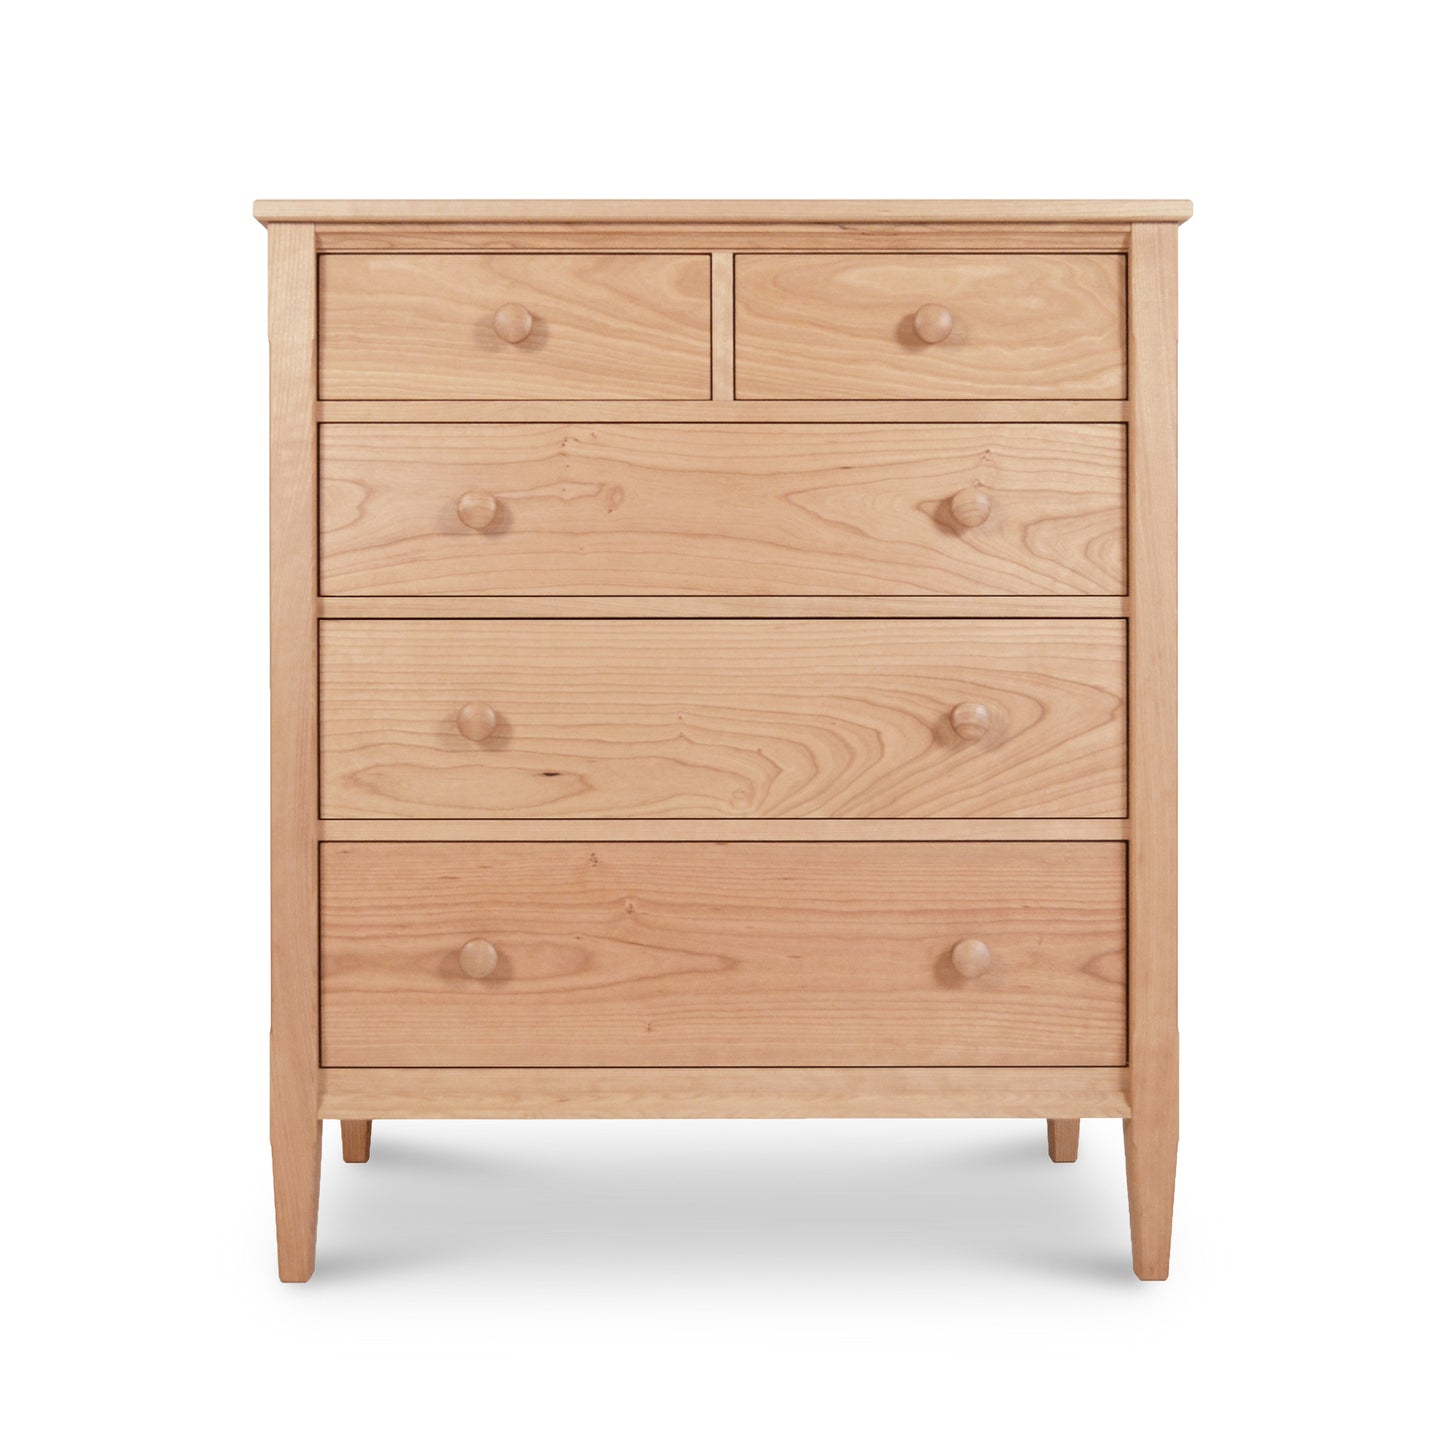 A Maple Corner Woodworks Vermont Shaker 5-Drawer Chest, displaying a natural light wood finish and round knobs, set against a plain white background.